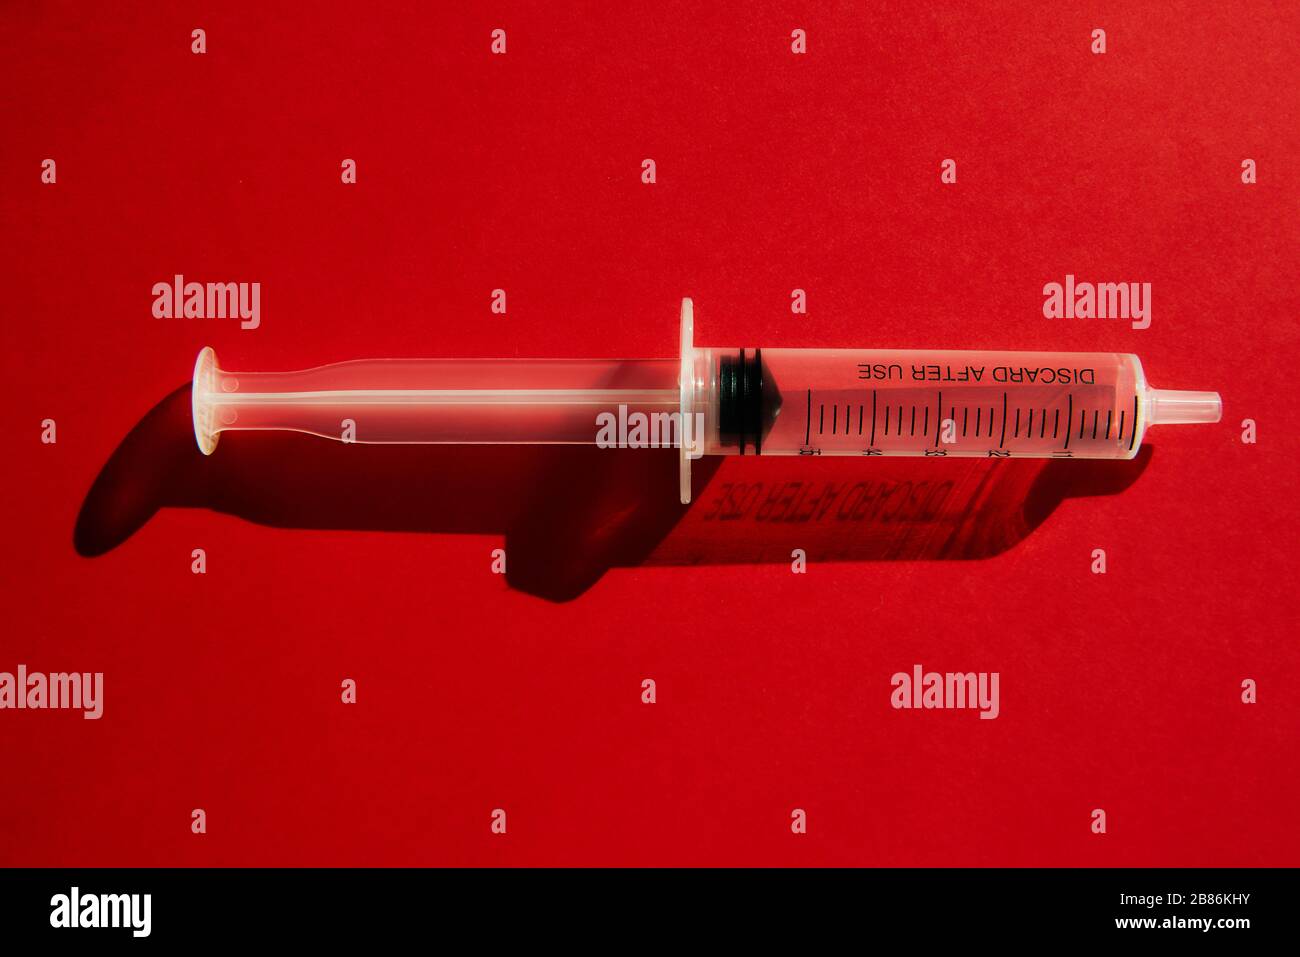 Disposable medical syringe without injection needle on a red background with highlights and shadows. Coronavirus concept. Stop 2019 Novel Coronavirus Stock Photo